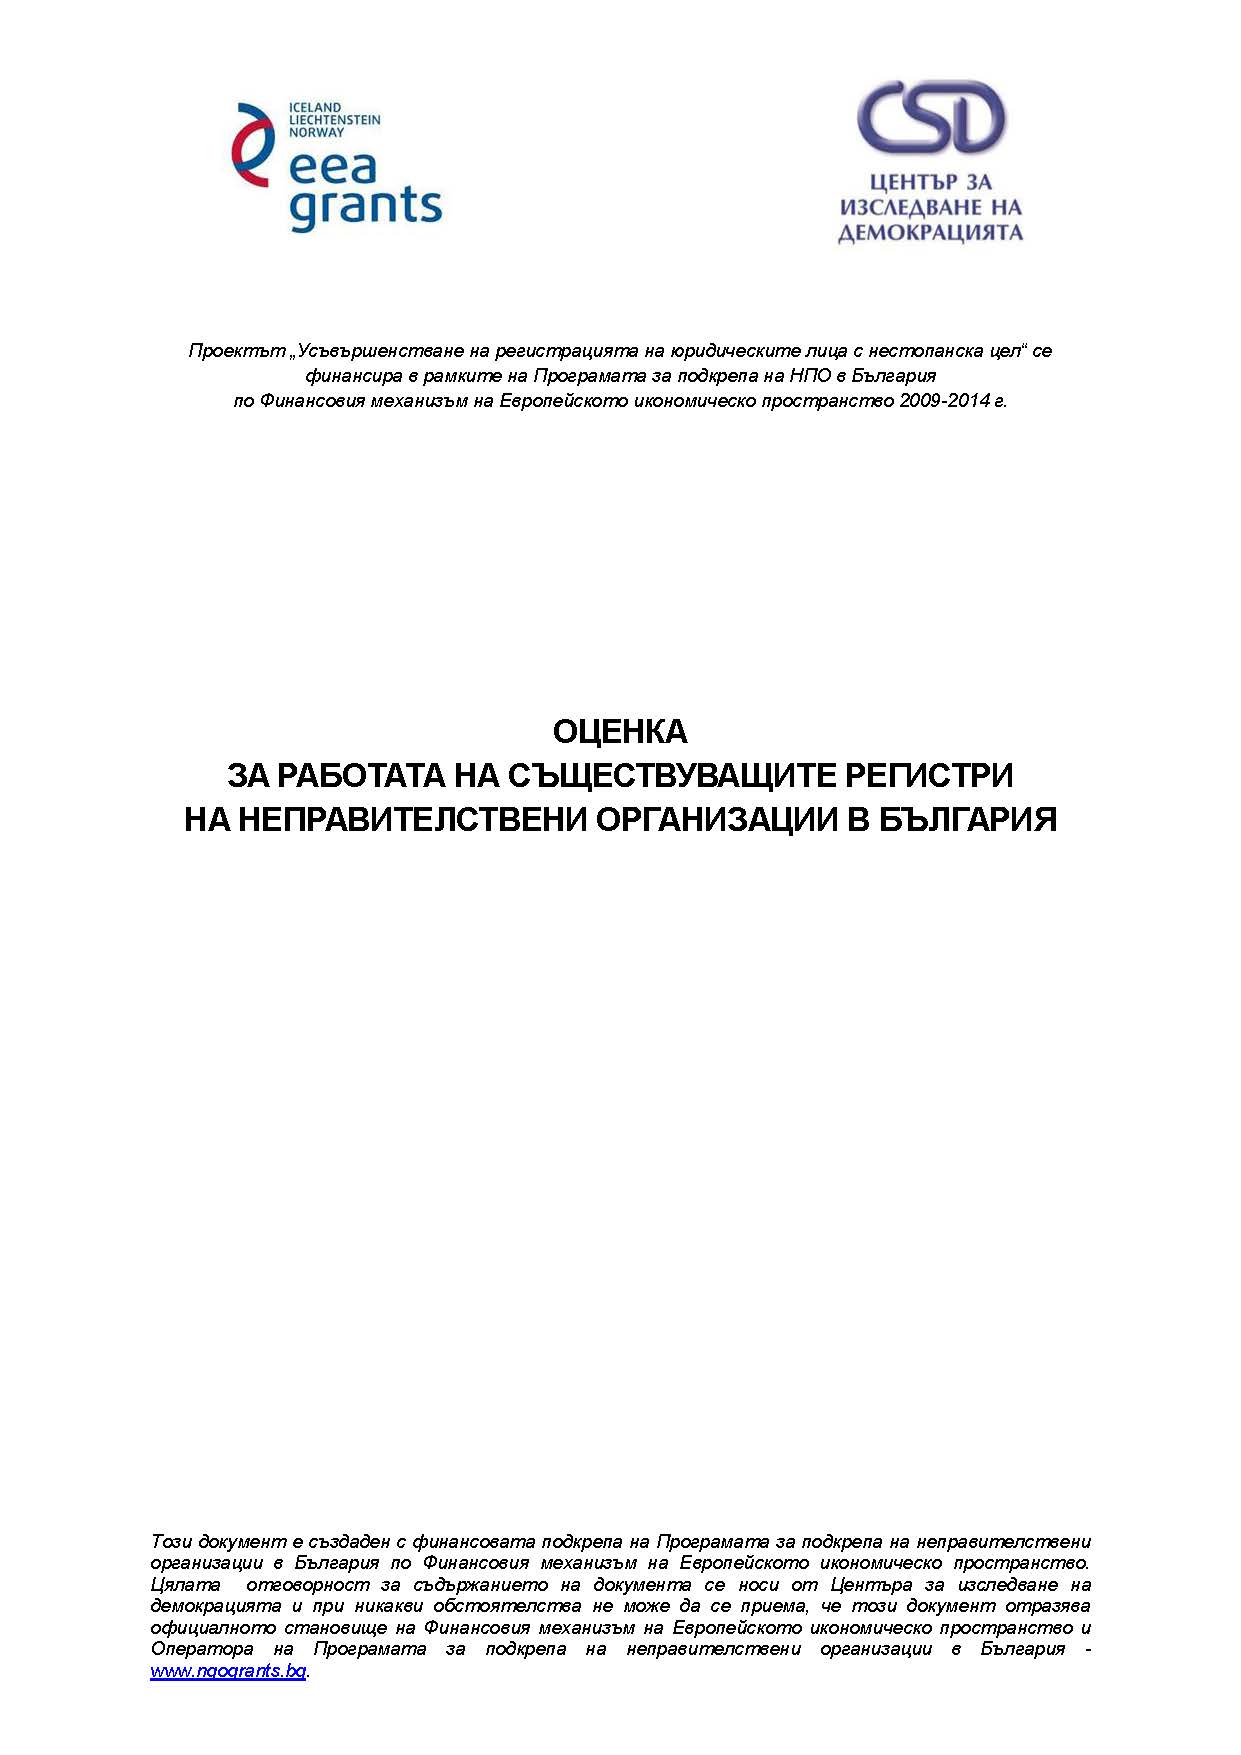 Evaluation of the work of the existing registers of NGOs in Bulgaria